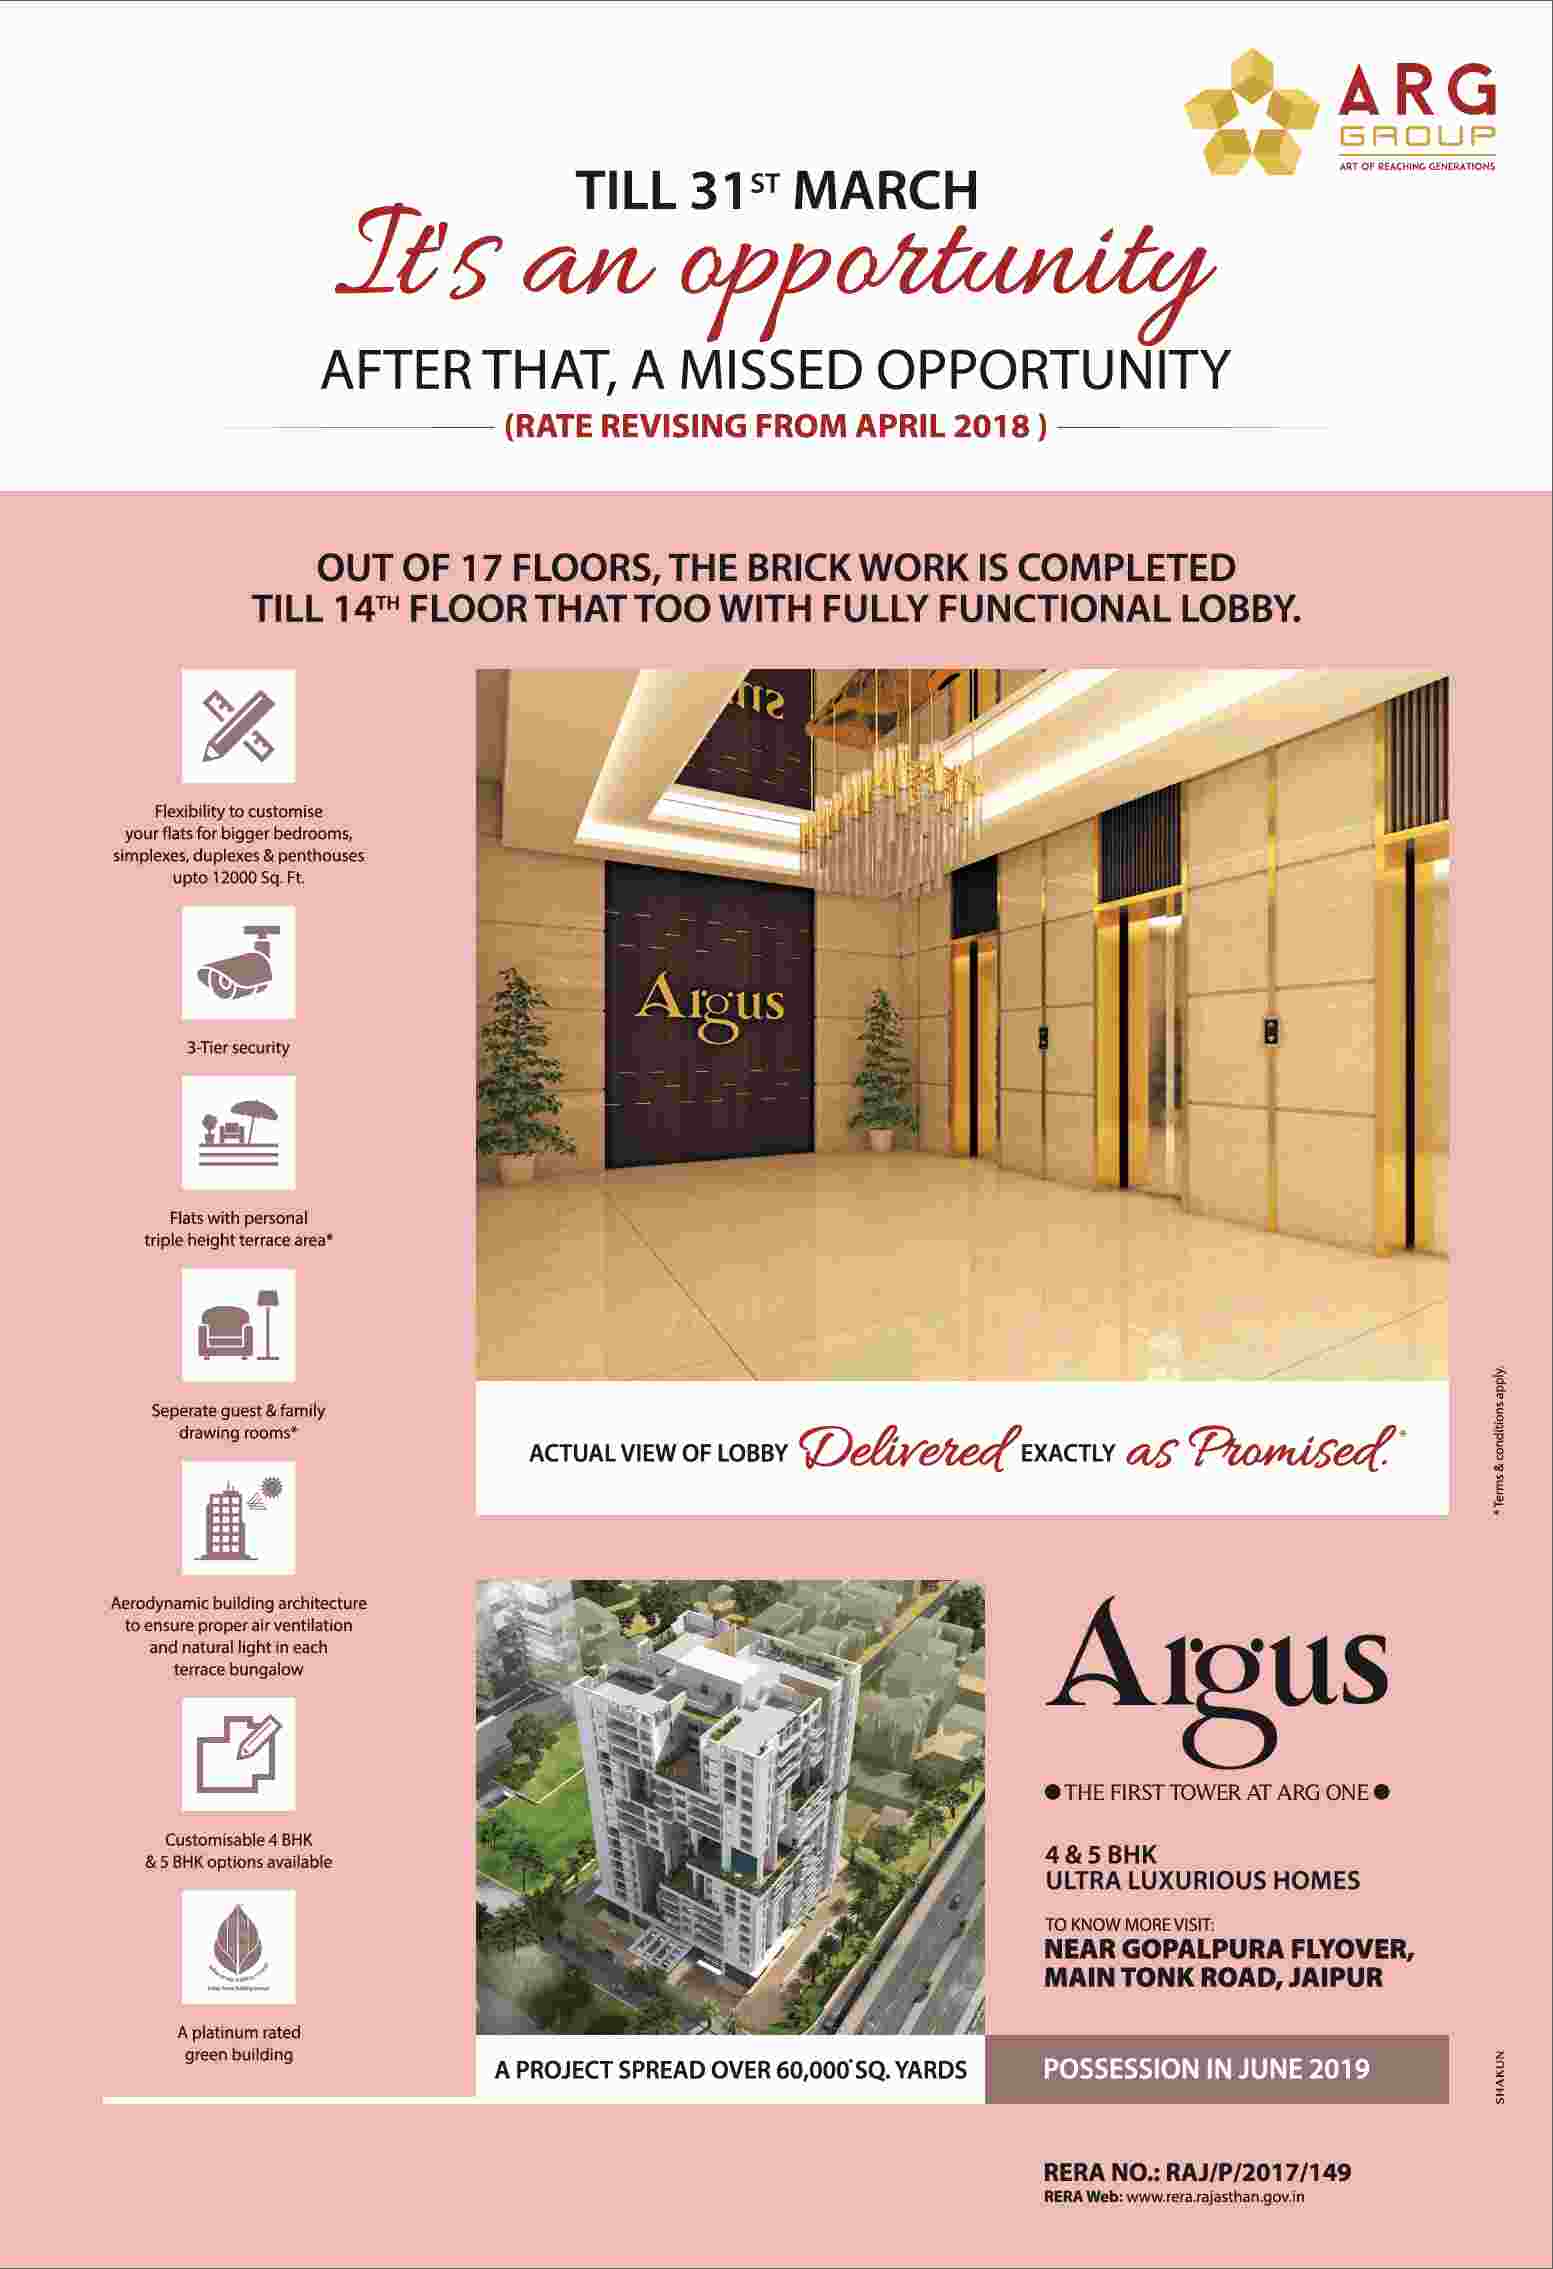 Book 4 & 5 BHK ultra luxurious homes at Argus, the first tower of ARG One in Jaipur